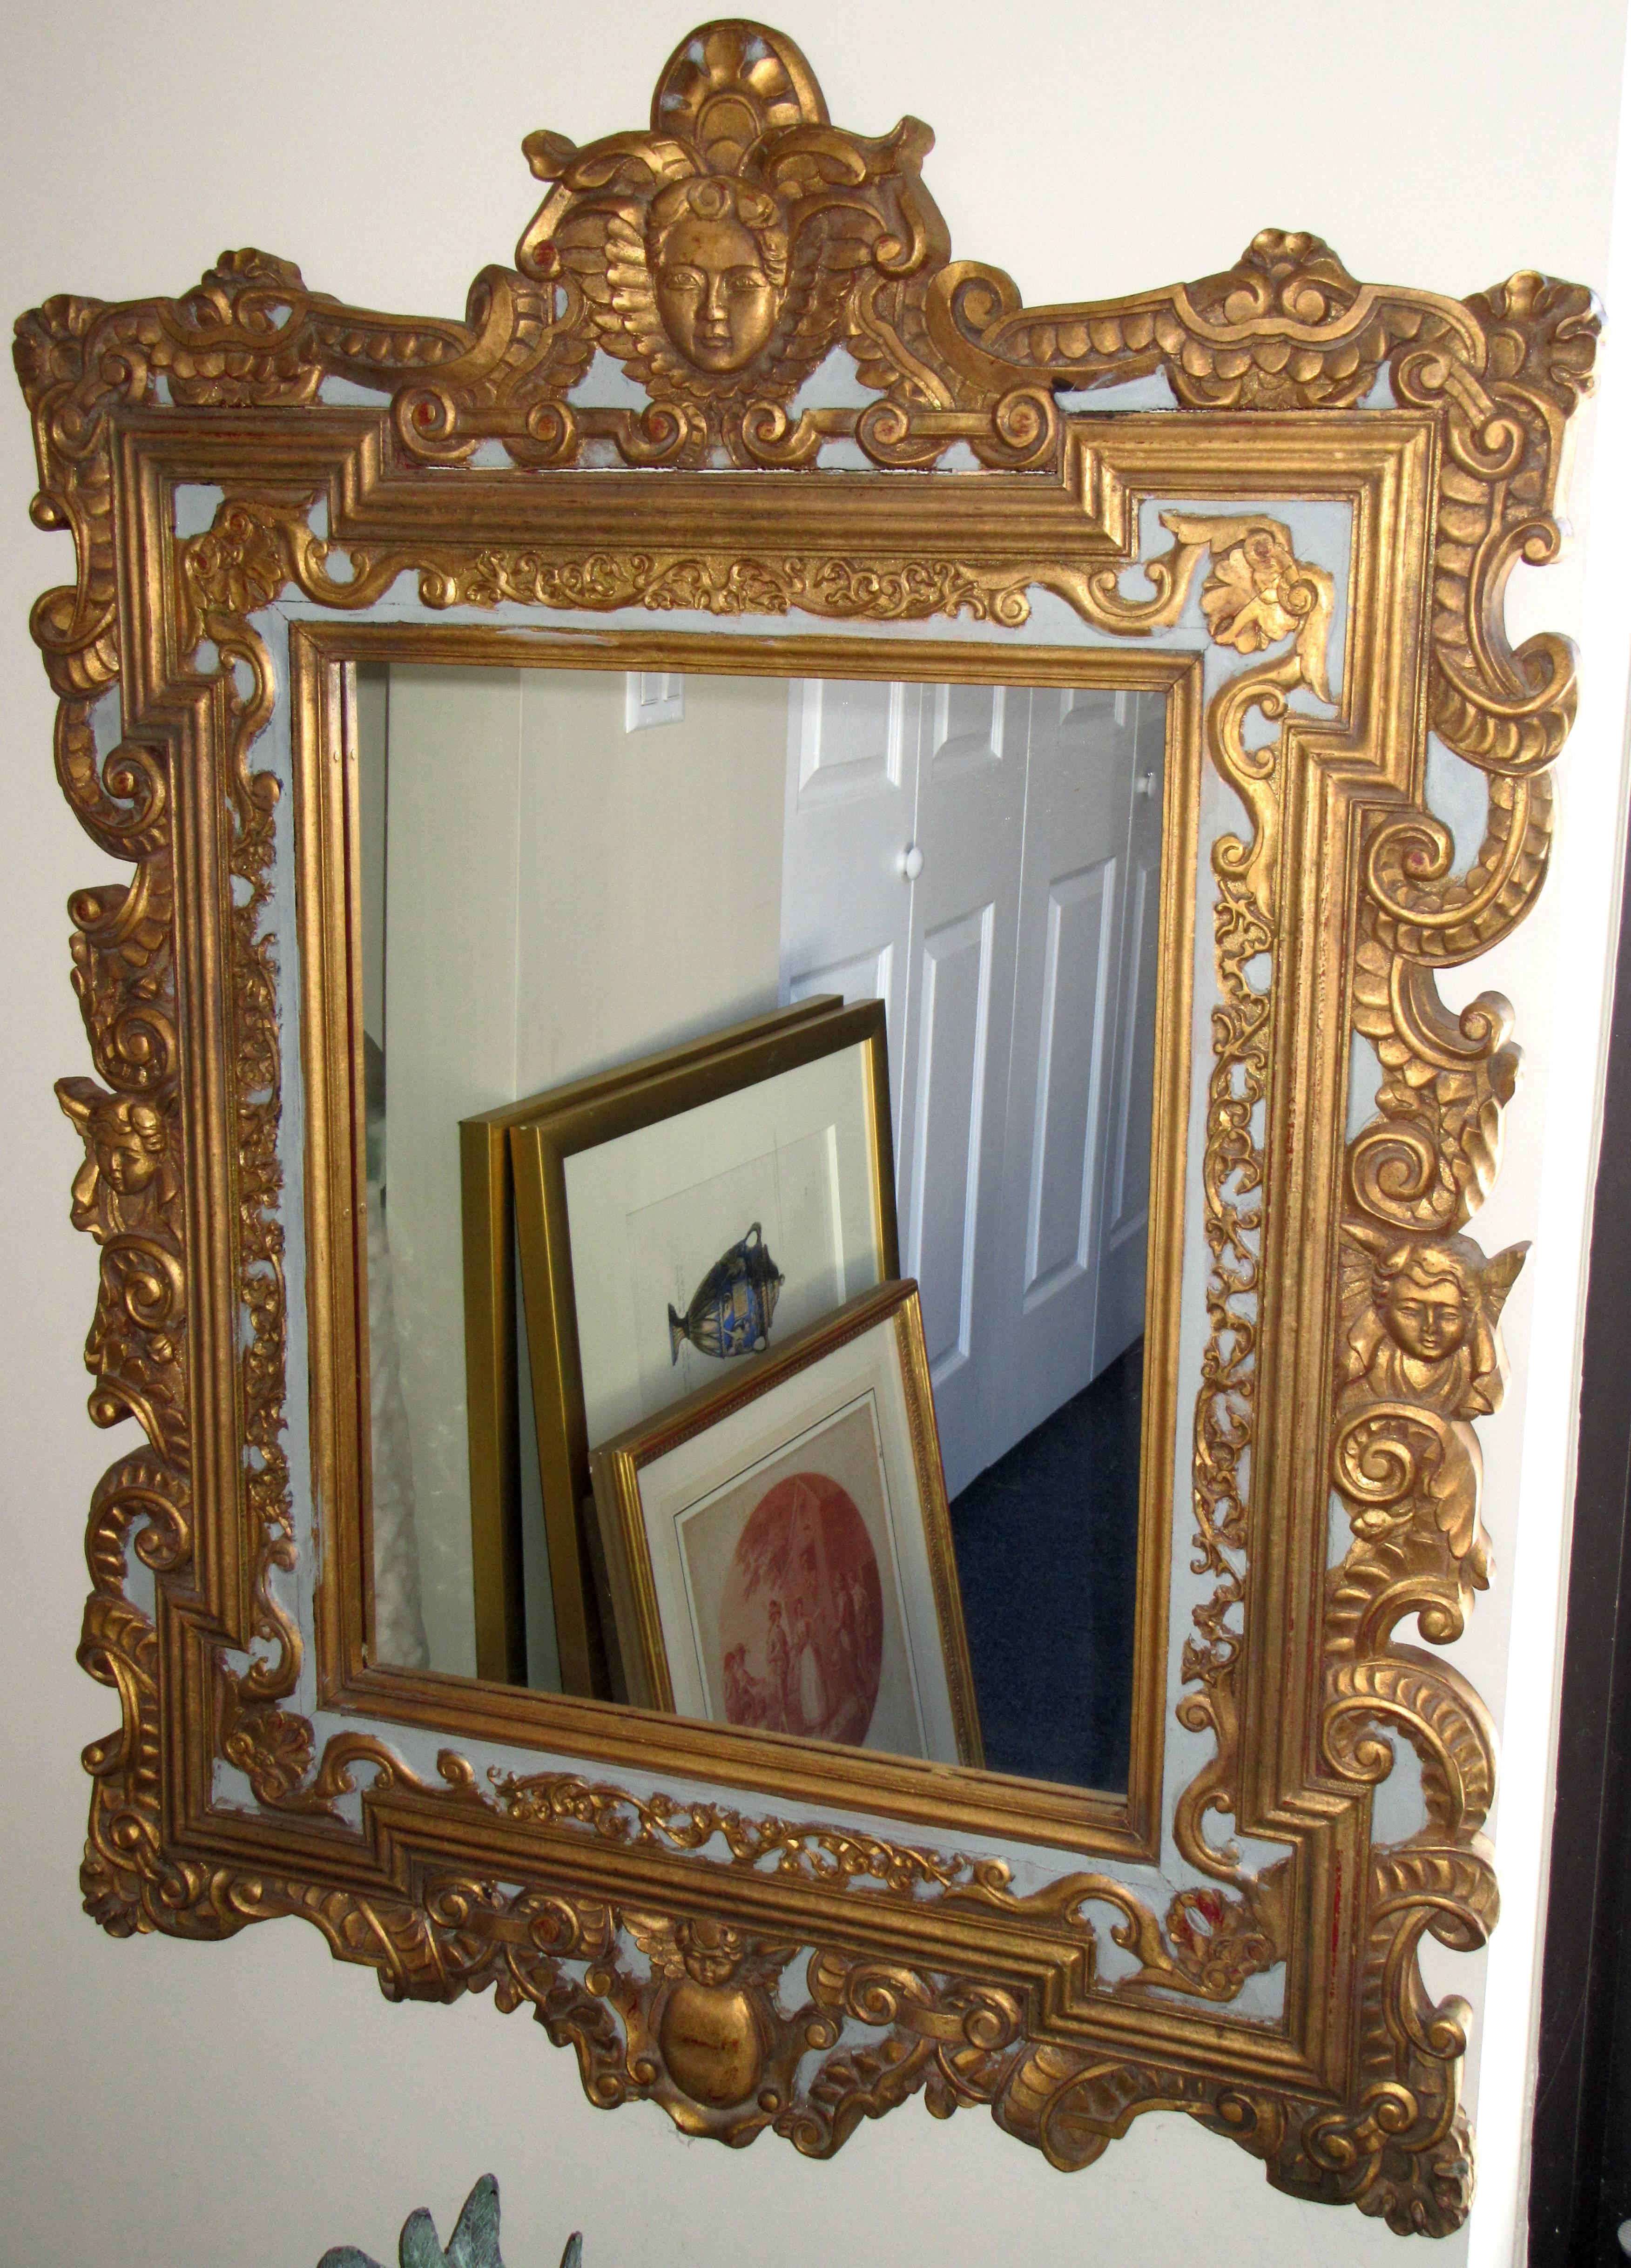 A pair of Baroque style carved and gilded wood wall mirrors. The background of the frame is painted in a pale blue.